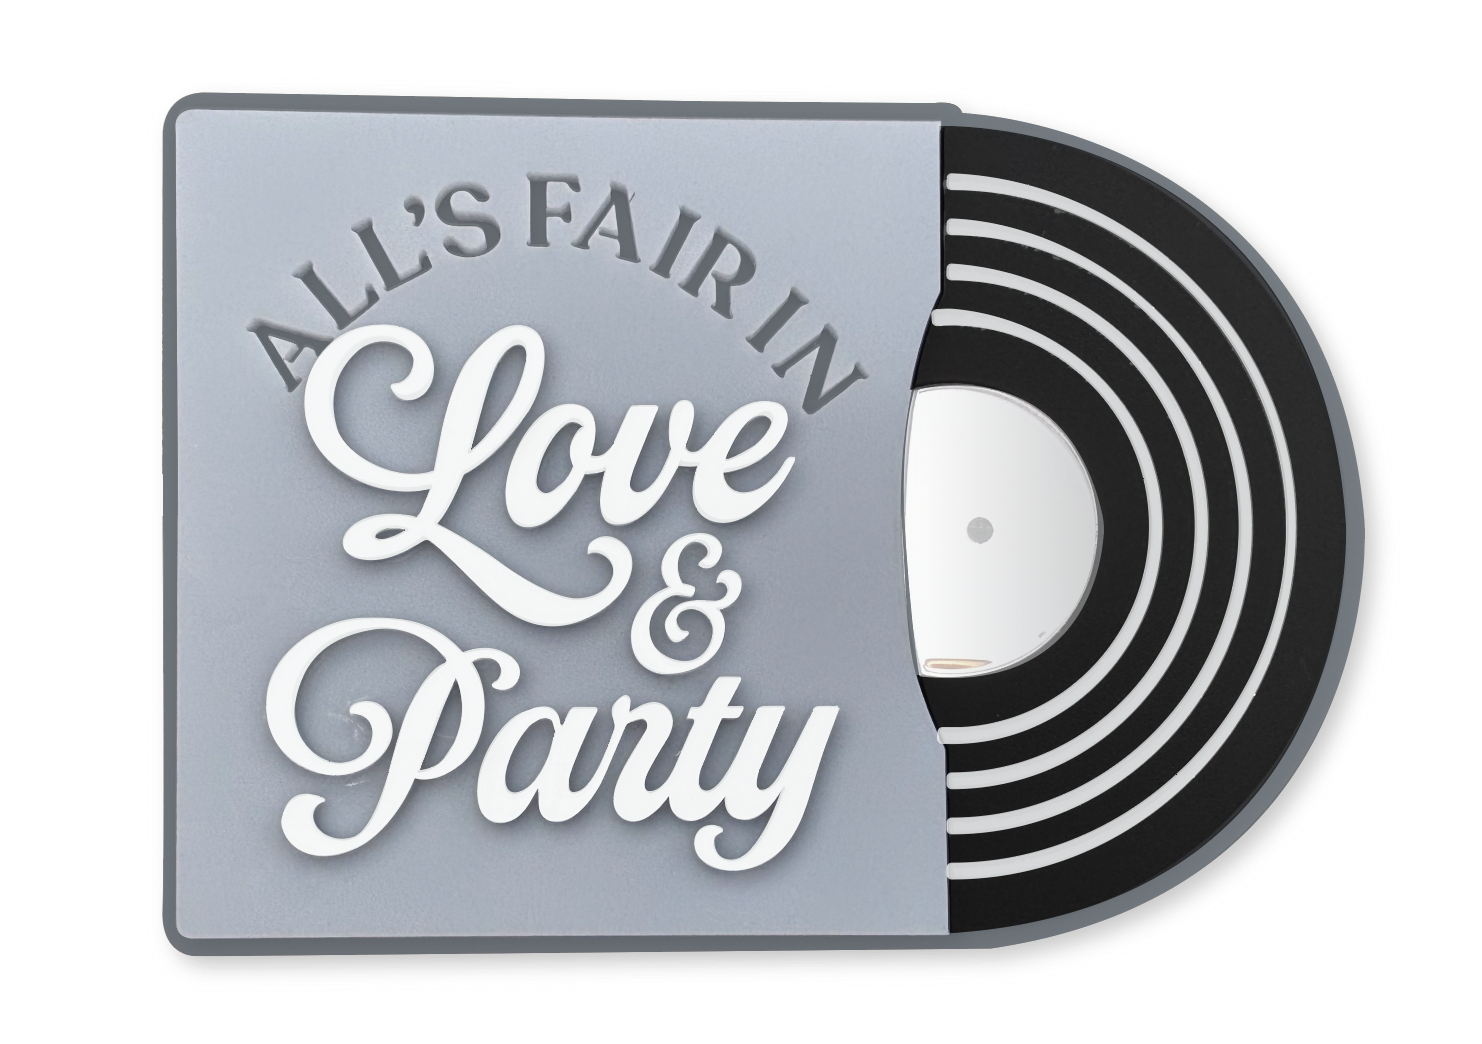 ALL FAIR IN LOVE AND PARTY RECORD - Cake Topper